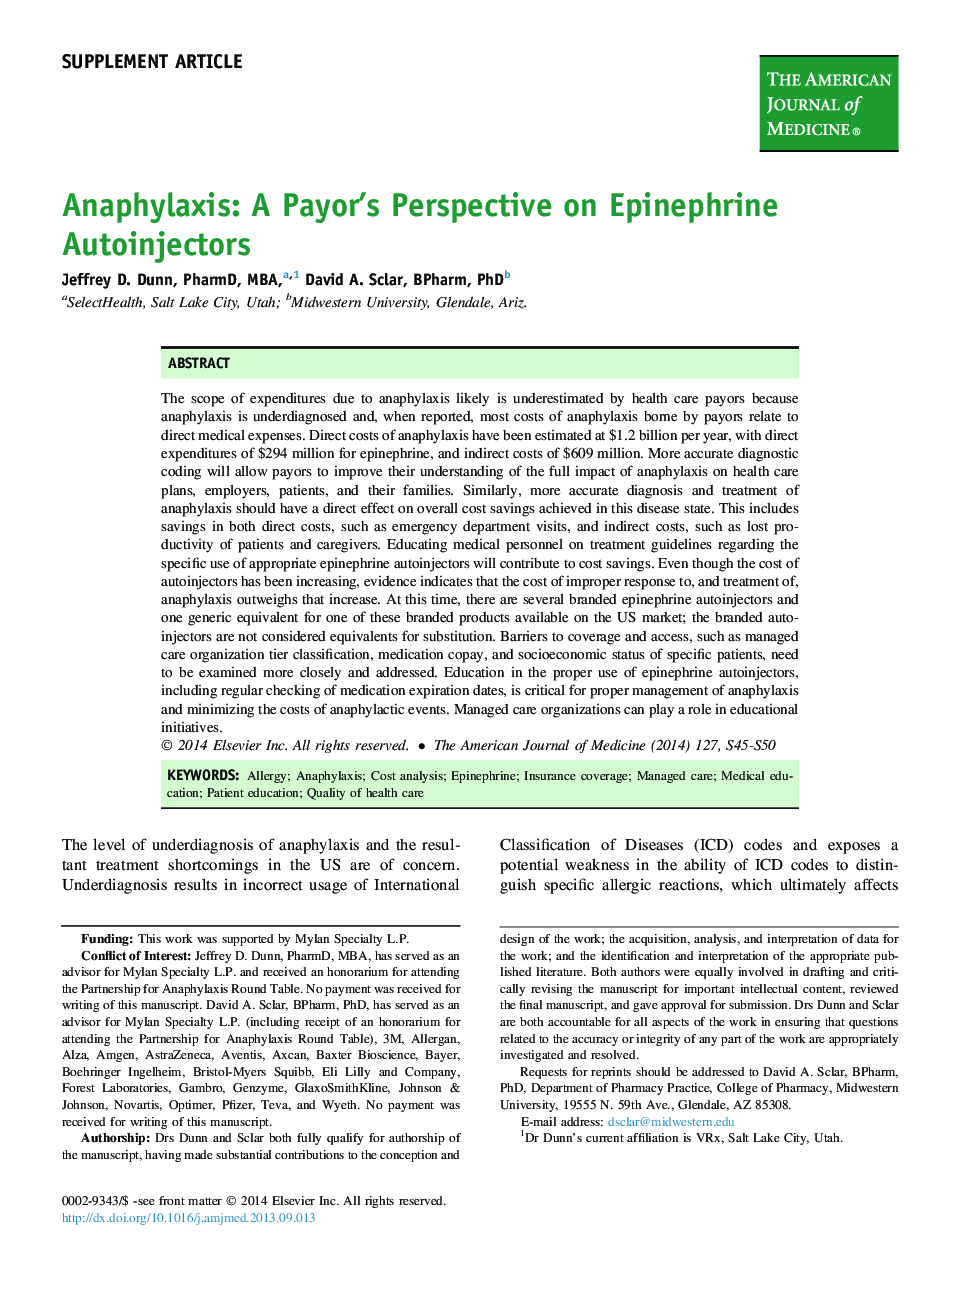 Anaphylaxis: A Payor's Perspective on Epinephrine Autoinjectors 